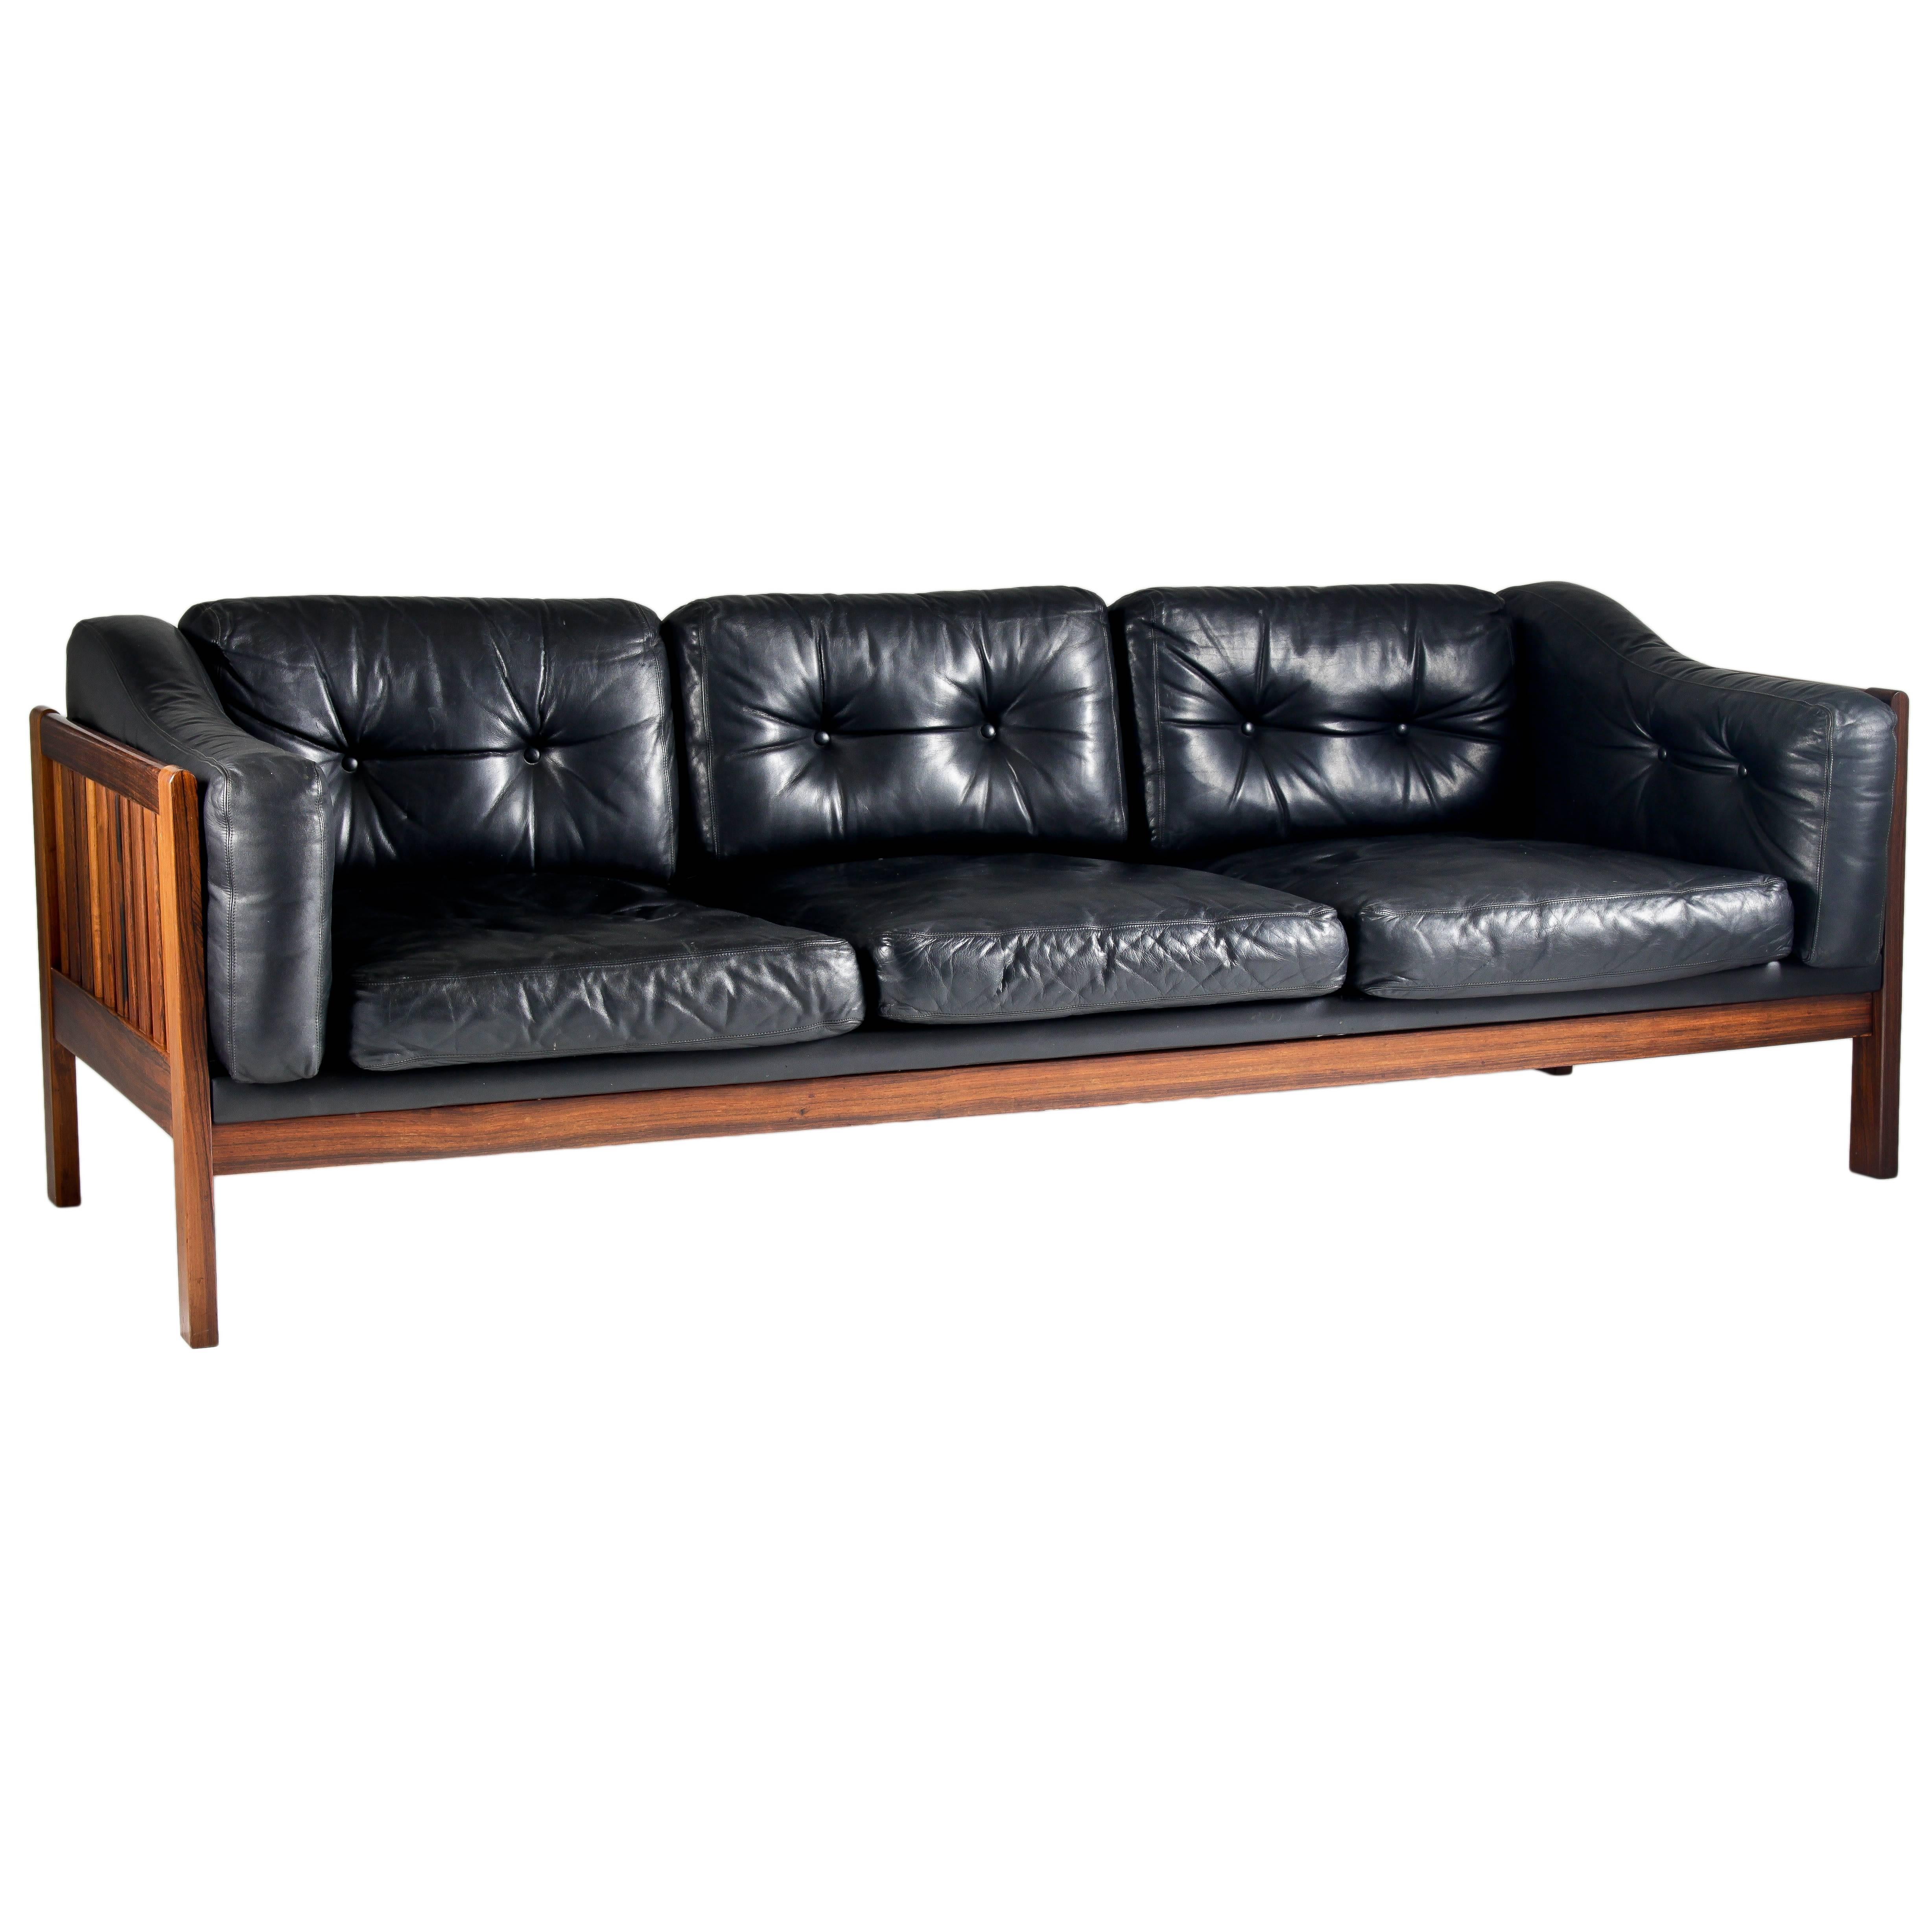 Rosewood and Leather Sofa "Monte Carlo" 1965